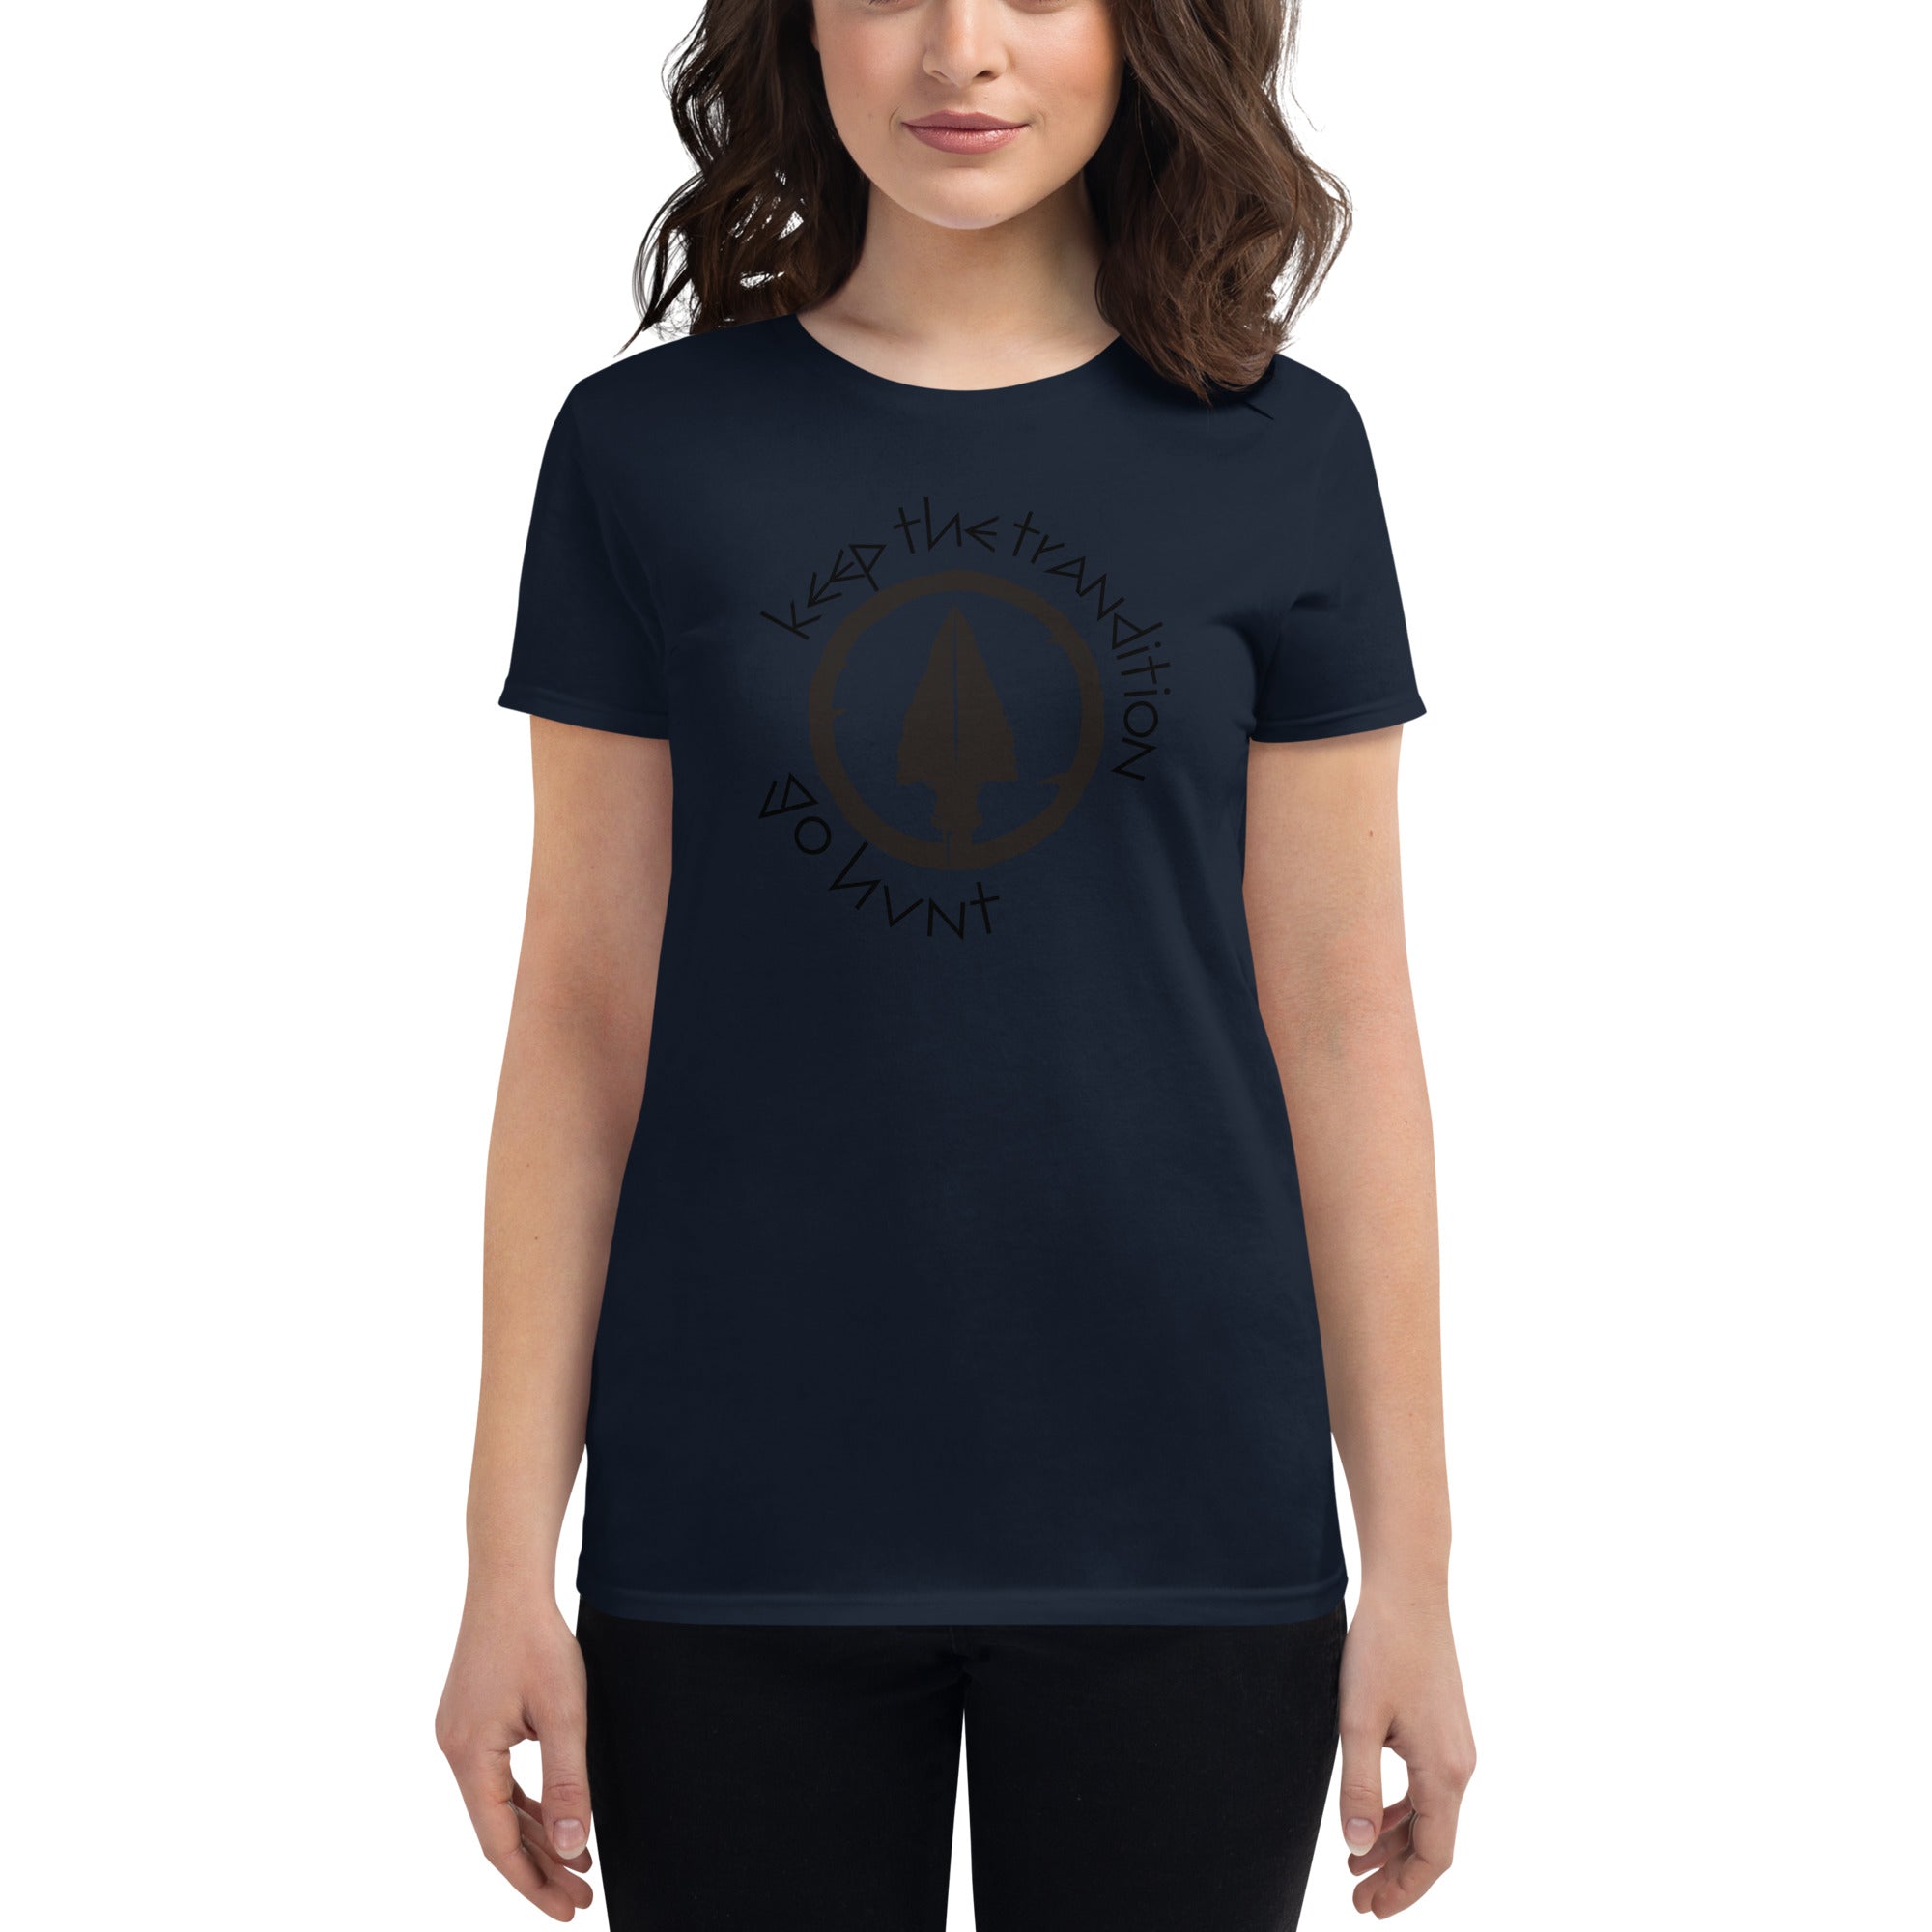 Keep The Tradition Women's Fitted T-Shirt - Go Hunt